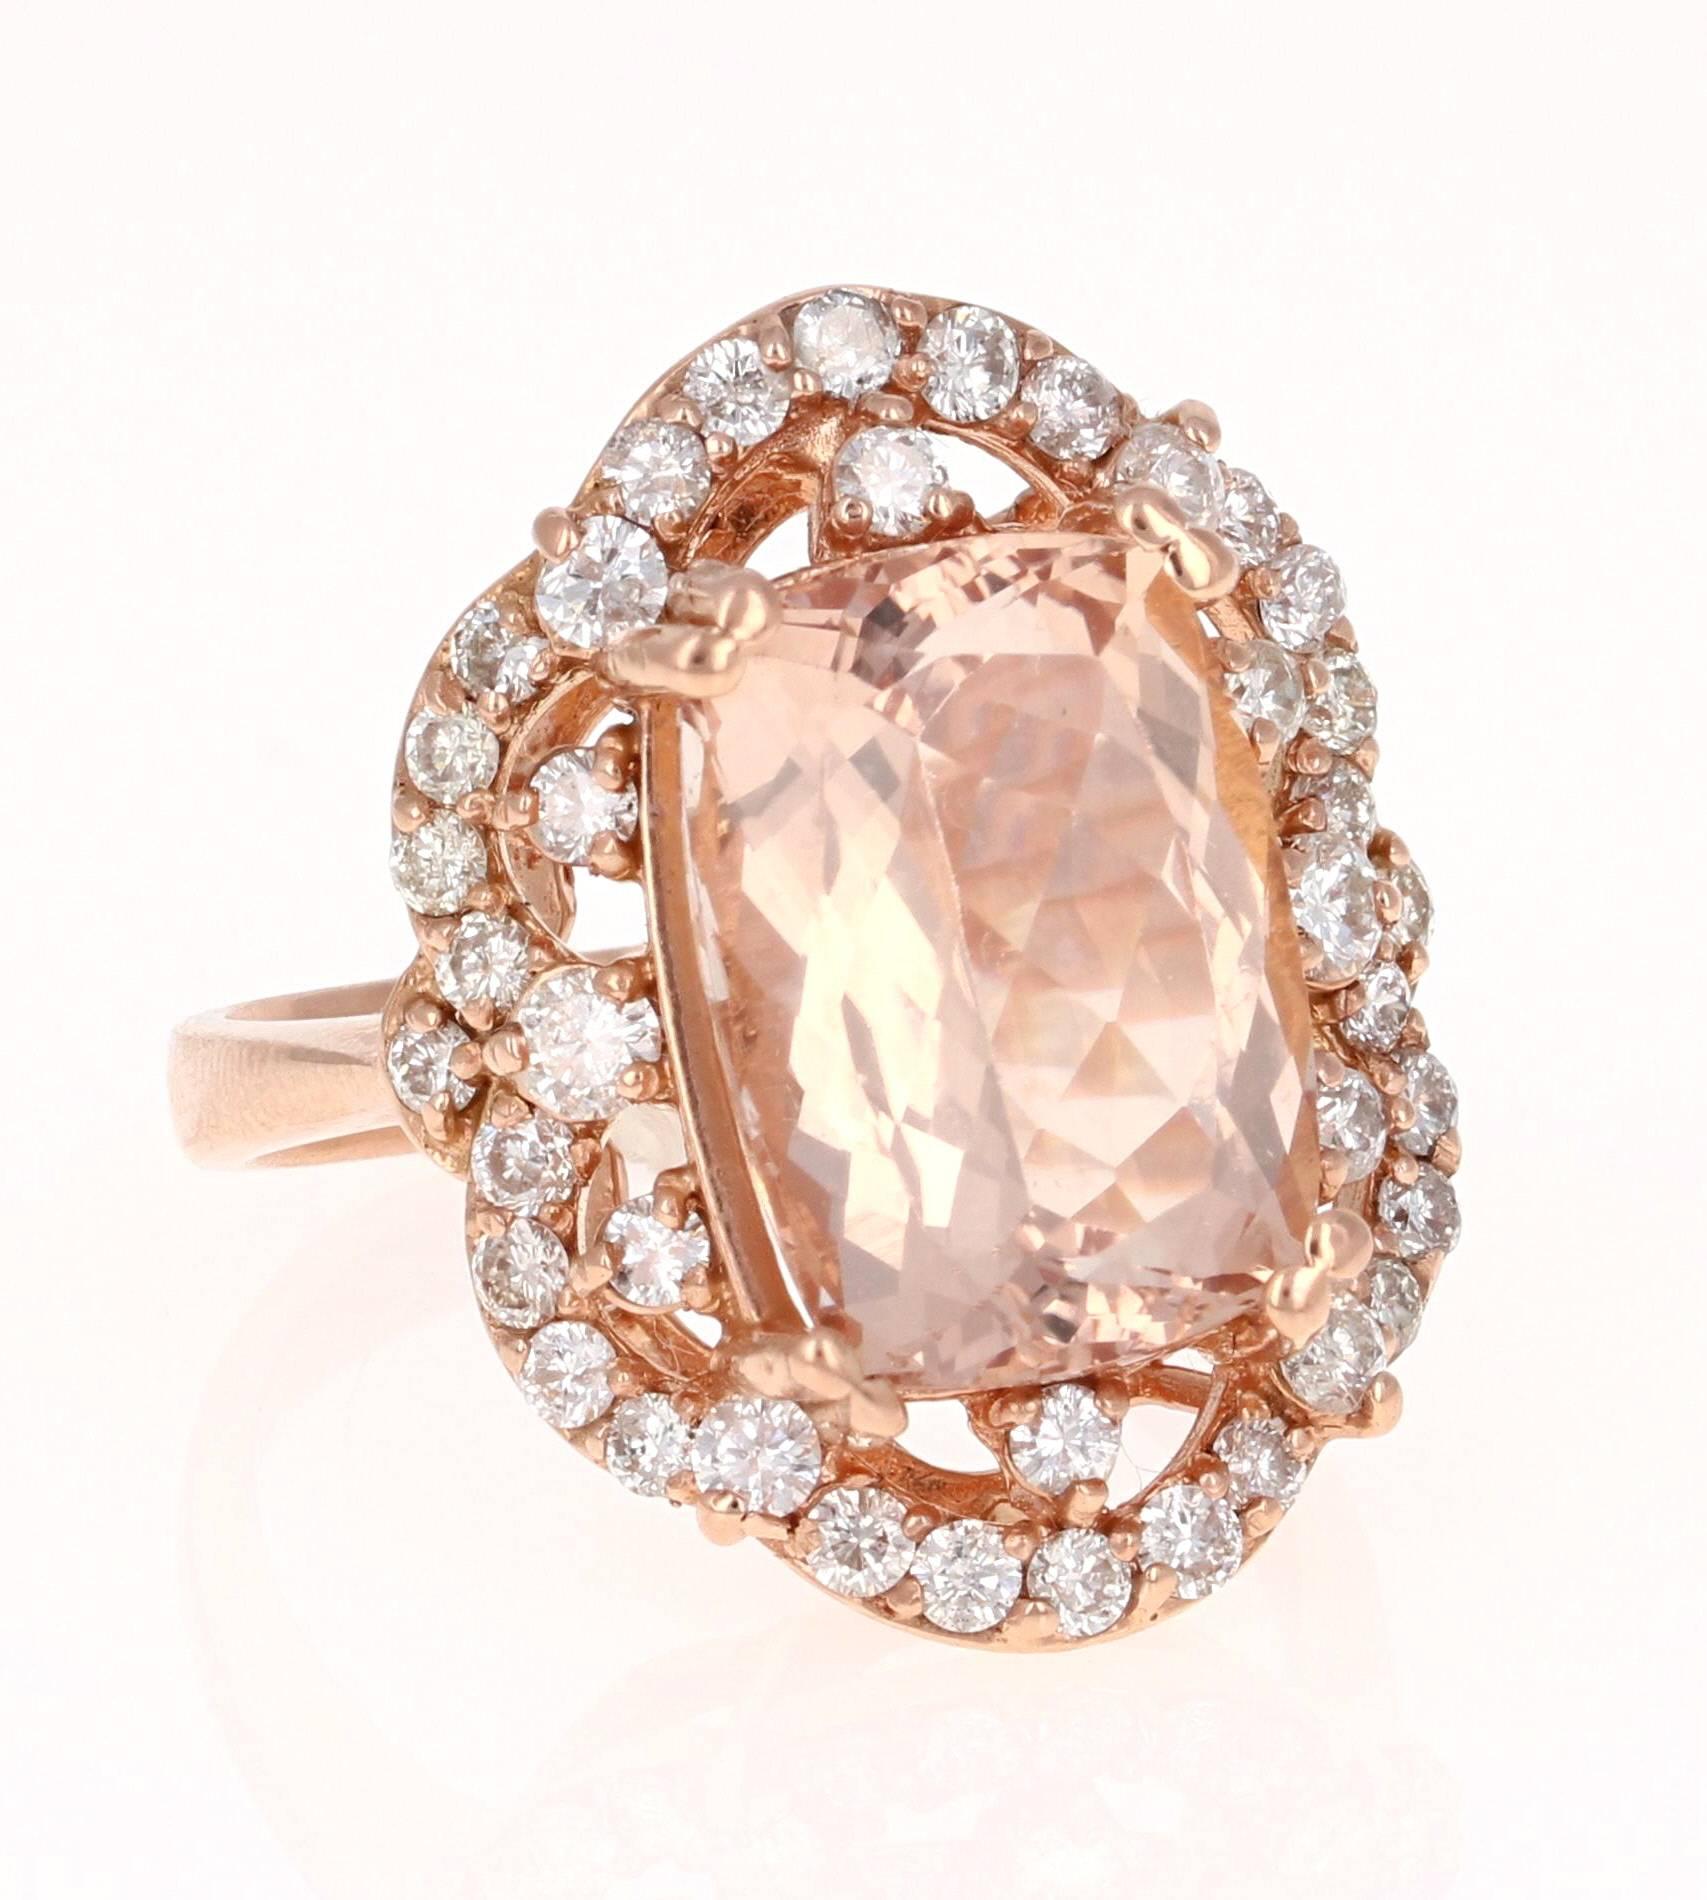 A gorgeous Art-deco inspired ring! This ring has a 6.07 carat Rectangular Cut Morganite in the center of the ring and is surrounded by 40 Round Brilliant Cut Diamonds that weigh 1.06 carats. The ring is casted in 14K Rose gold and weighs